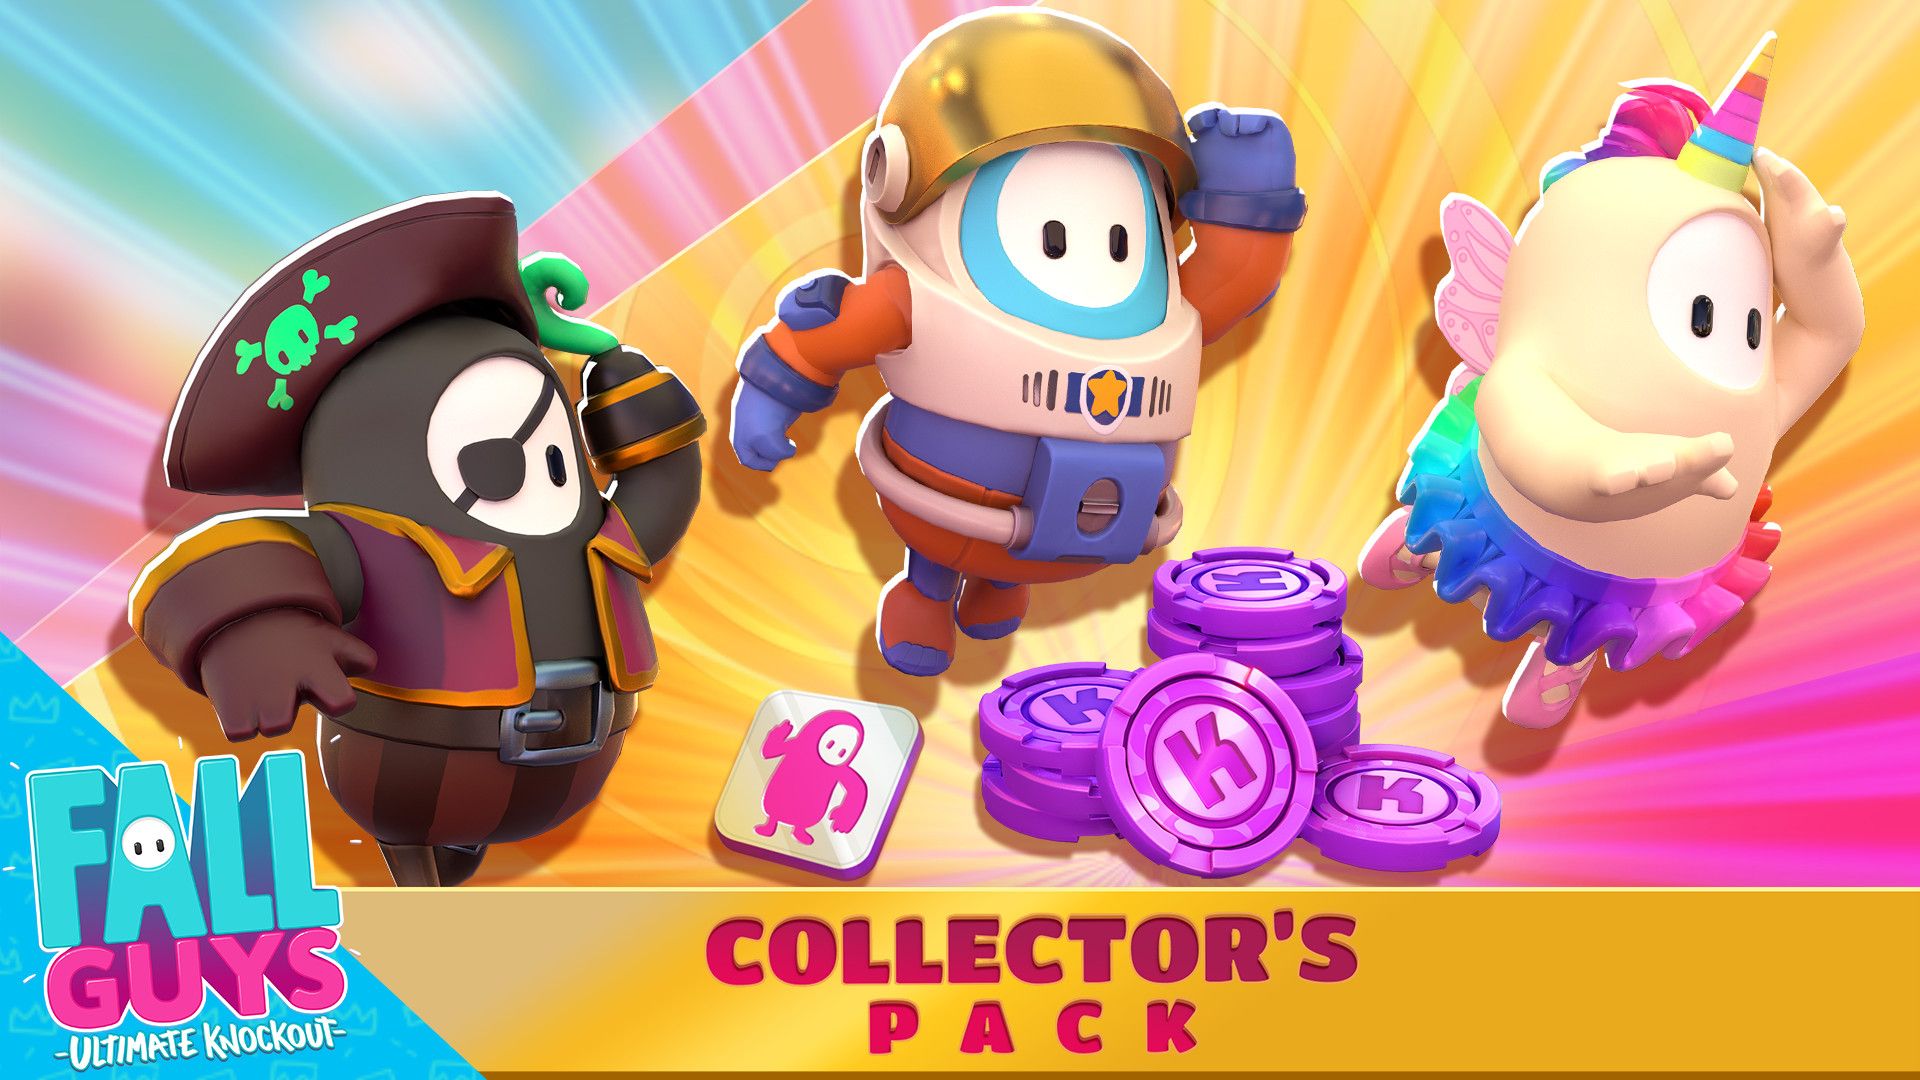 Fall Guys: Collectors Pack on Steam